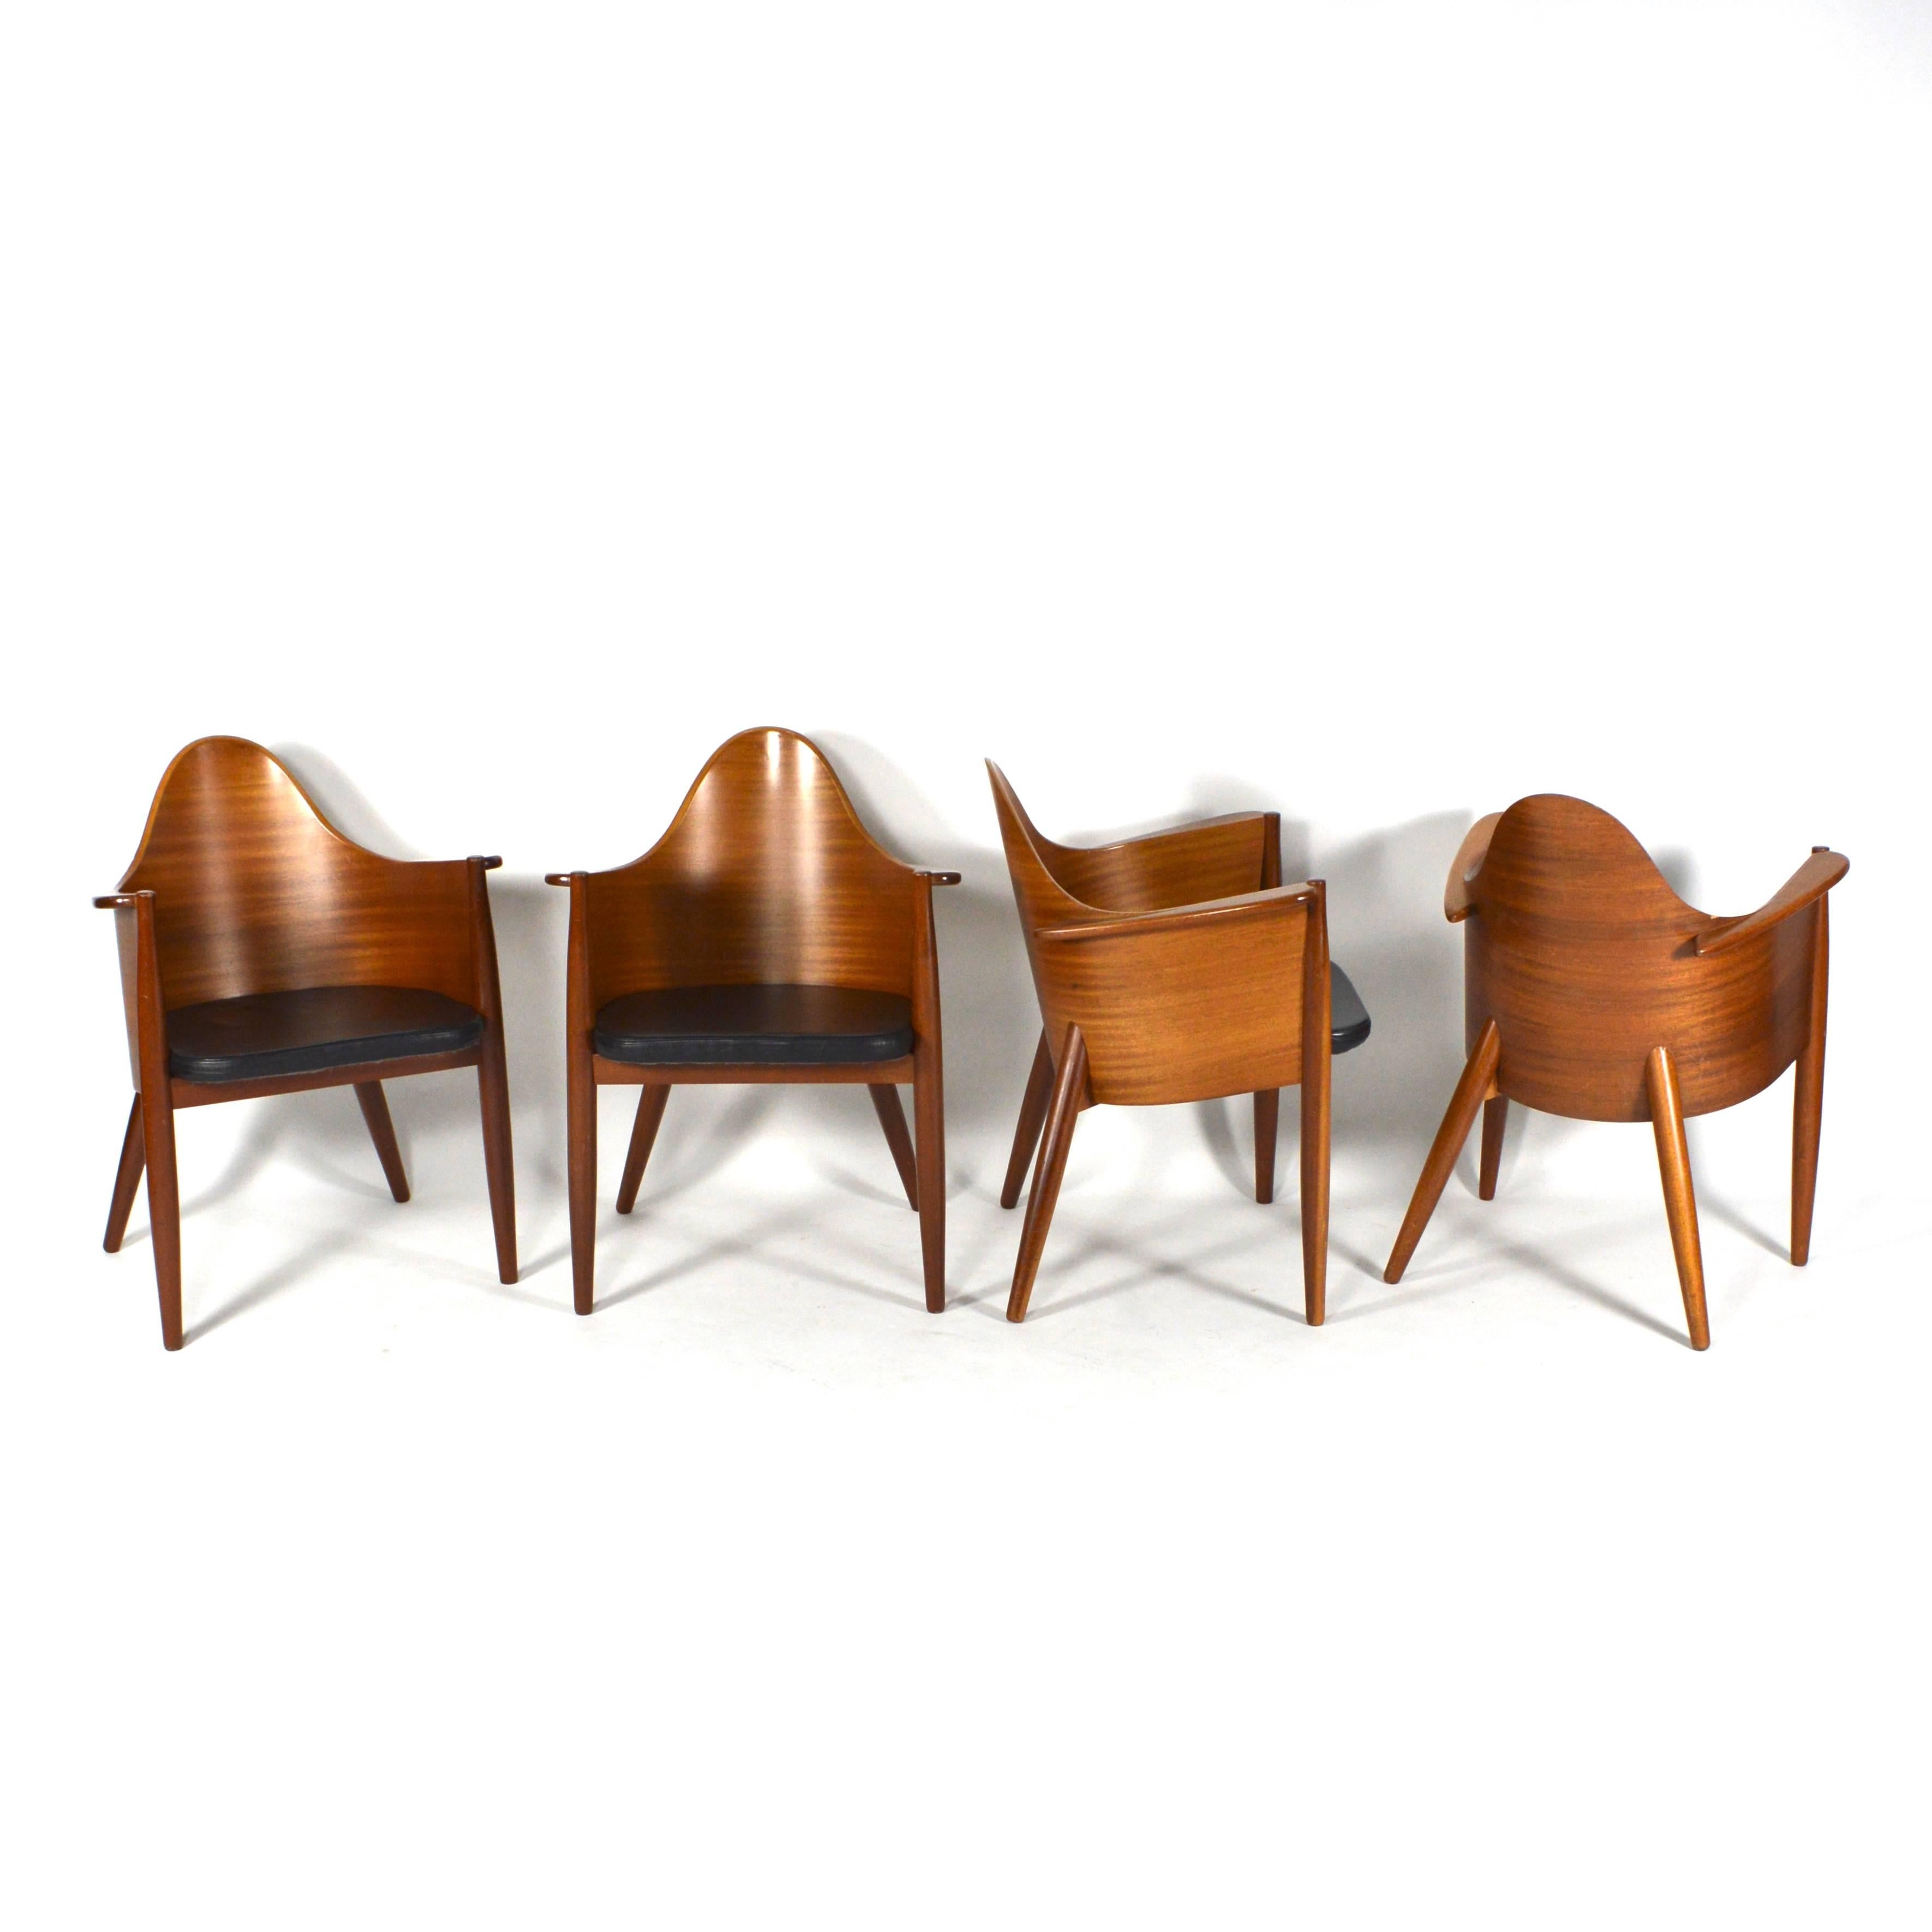 Very rare set of 4 Scandinavian Teak Plywood / Leather Side Chairs - Mid Century 5